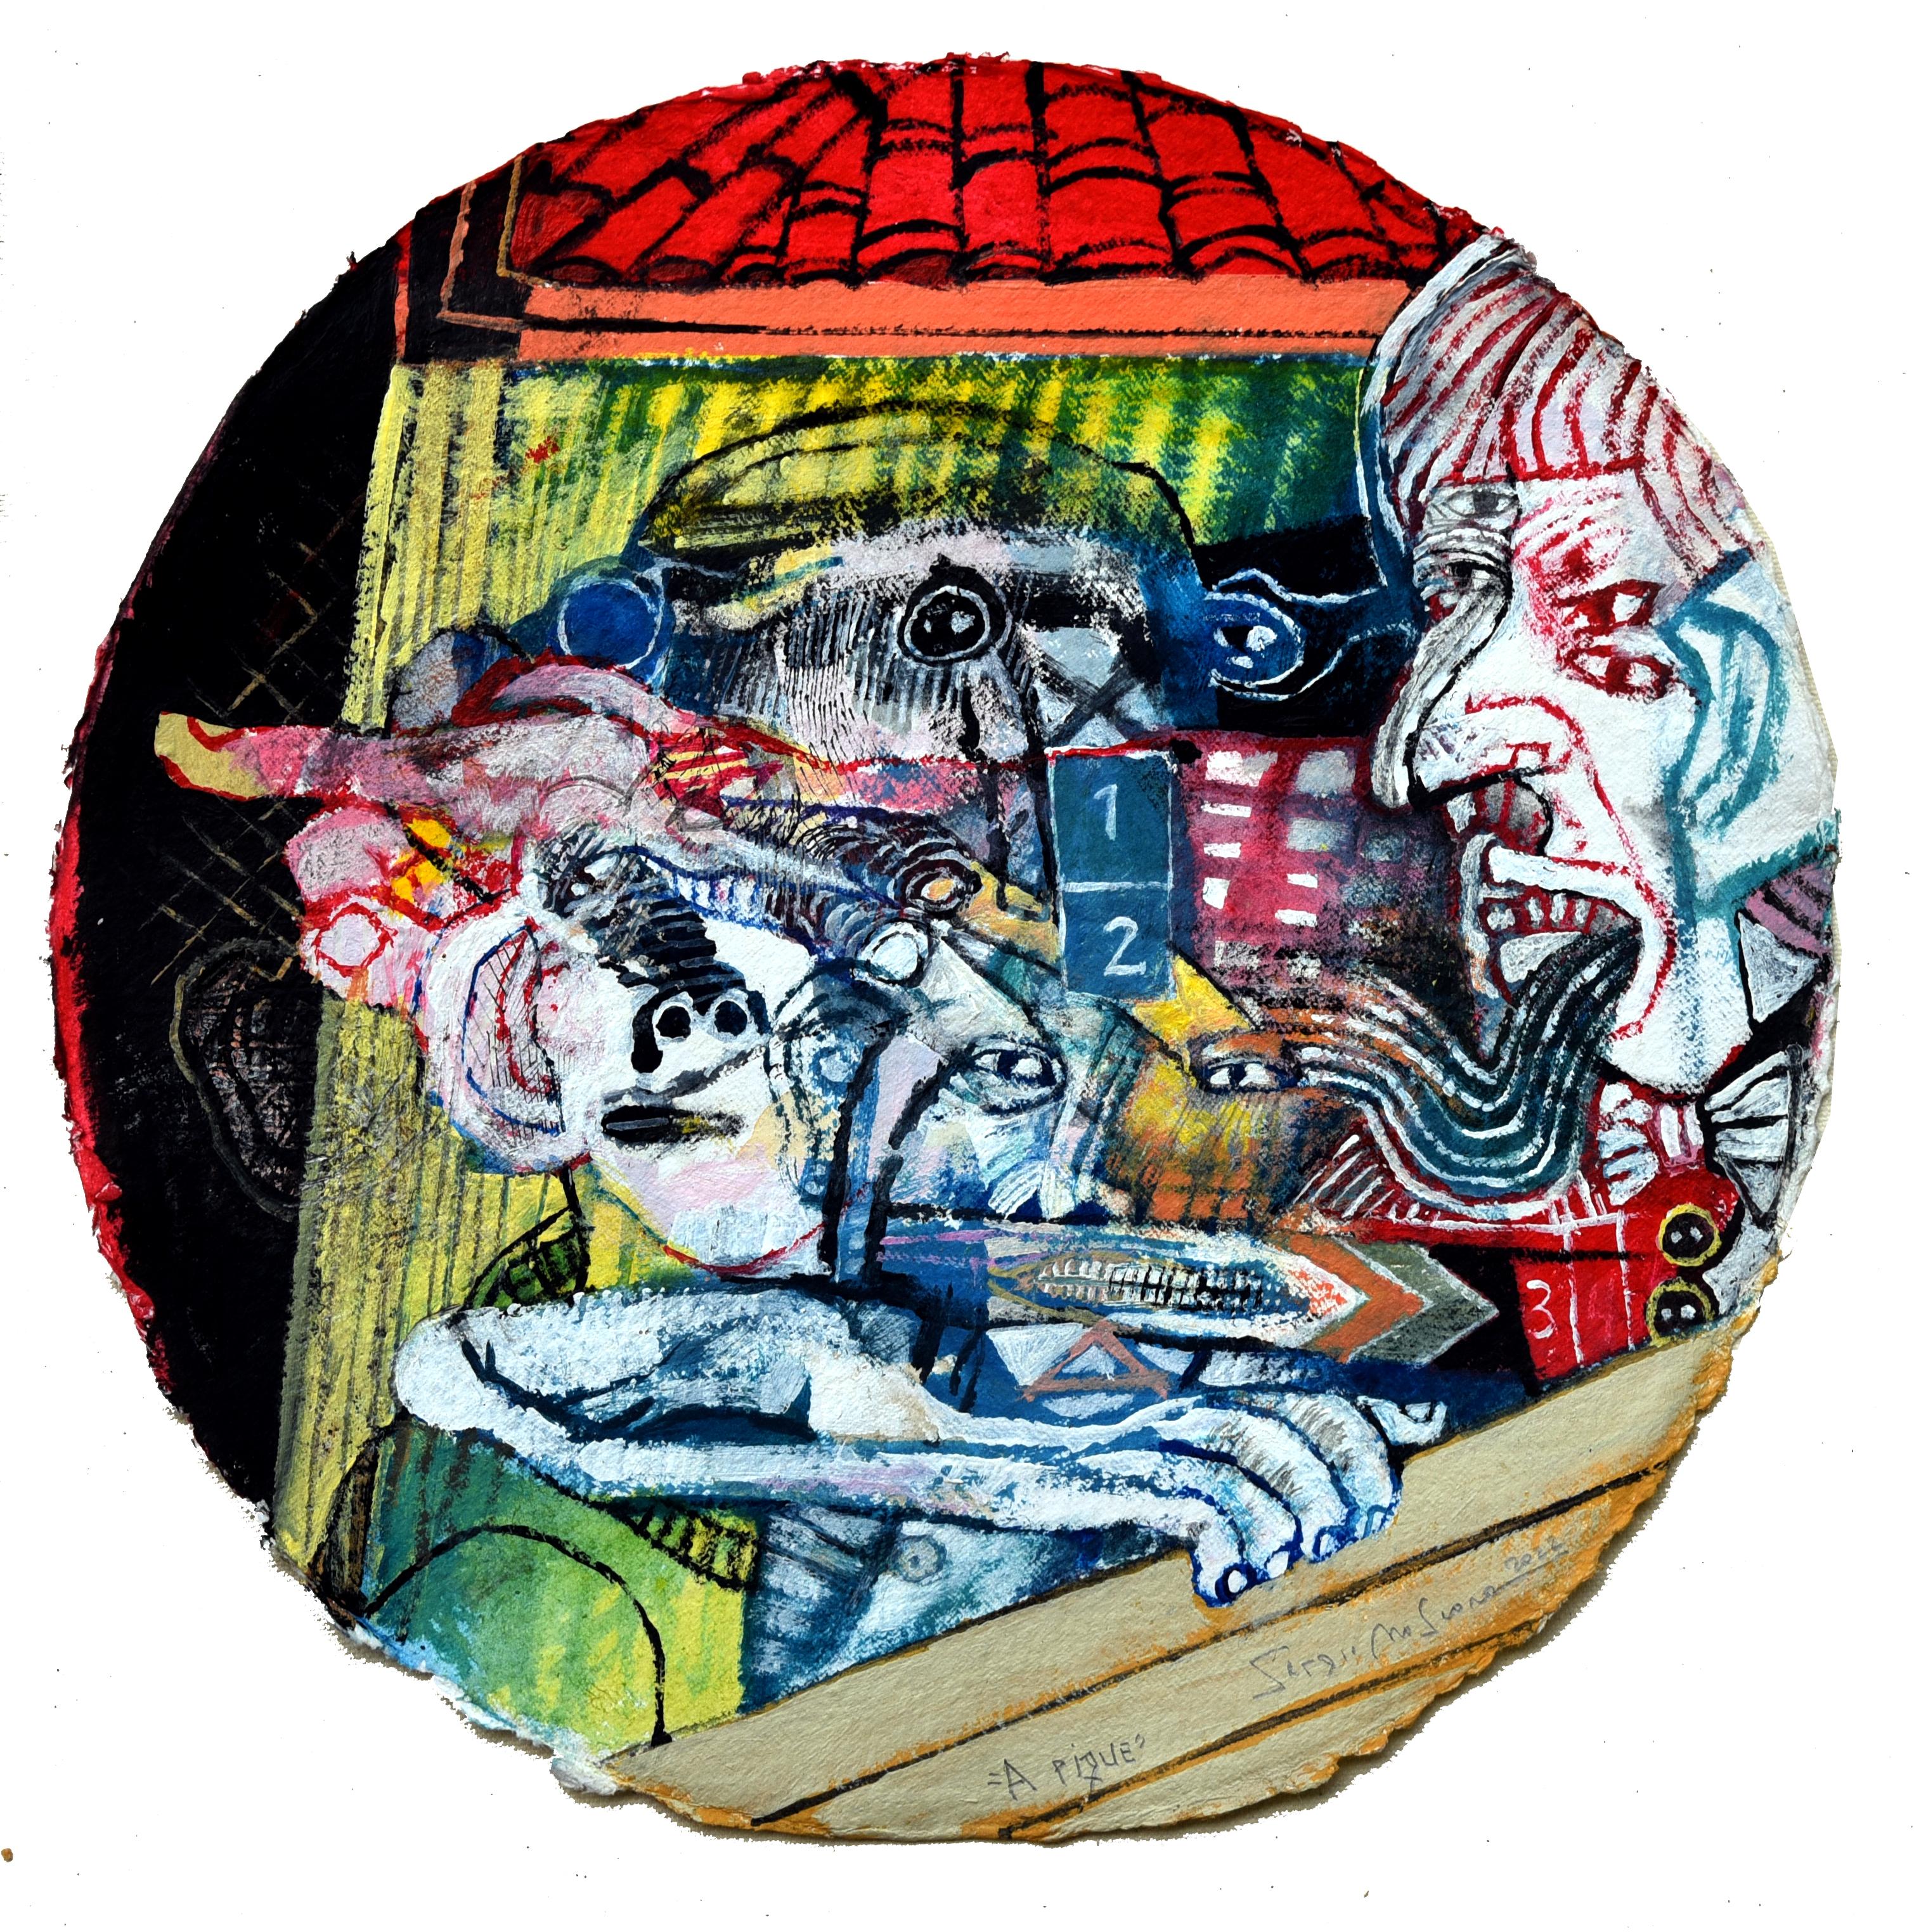 Acrylic paint and ink on paper
Tondo (diameter 30 cm)
Hand-signed, entitled and dated lower right by the artist